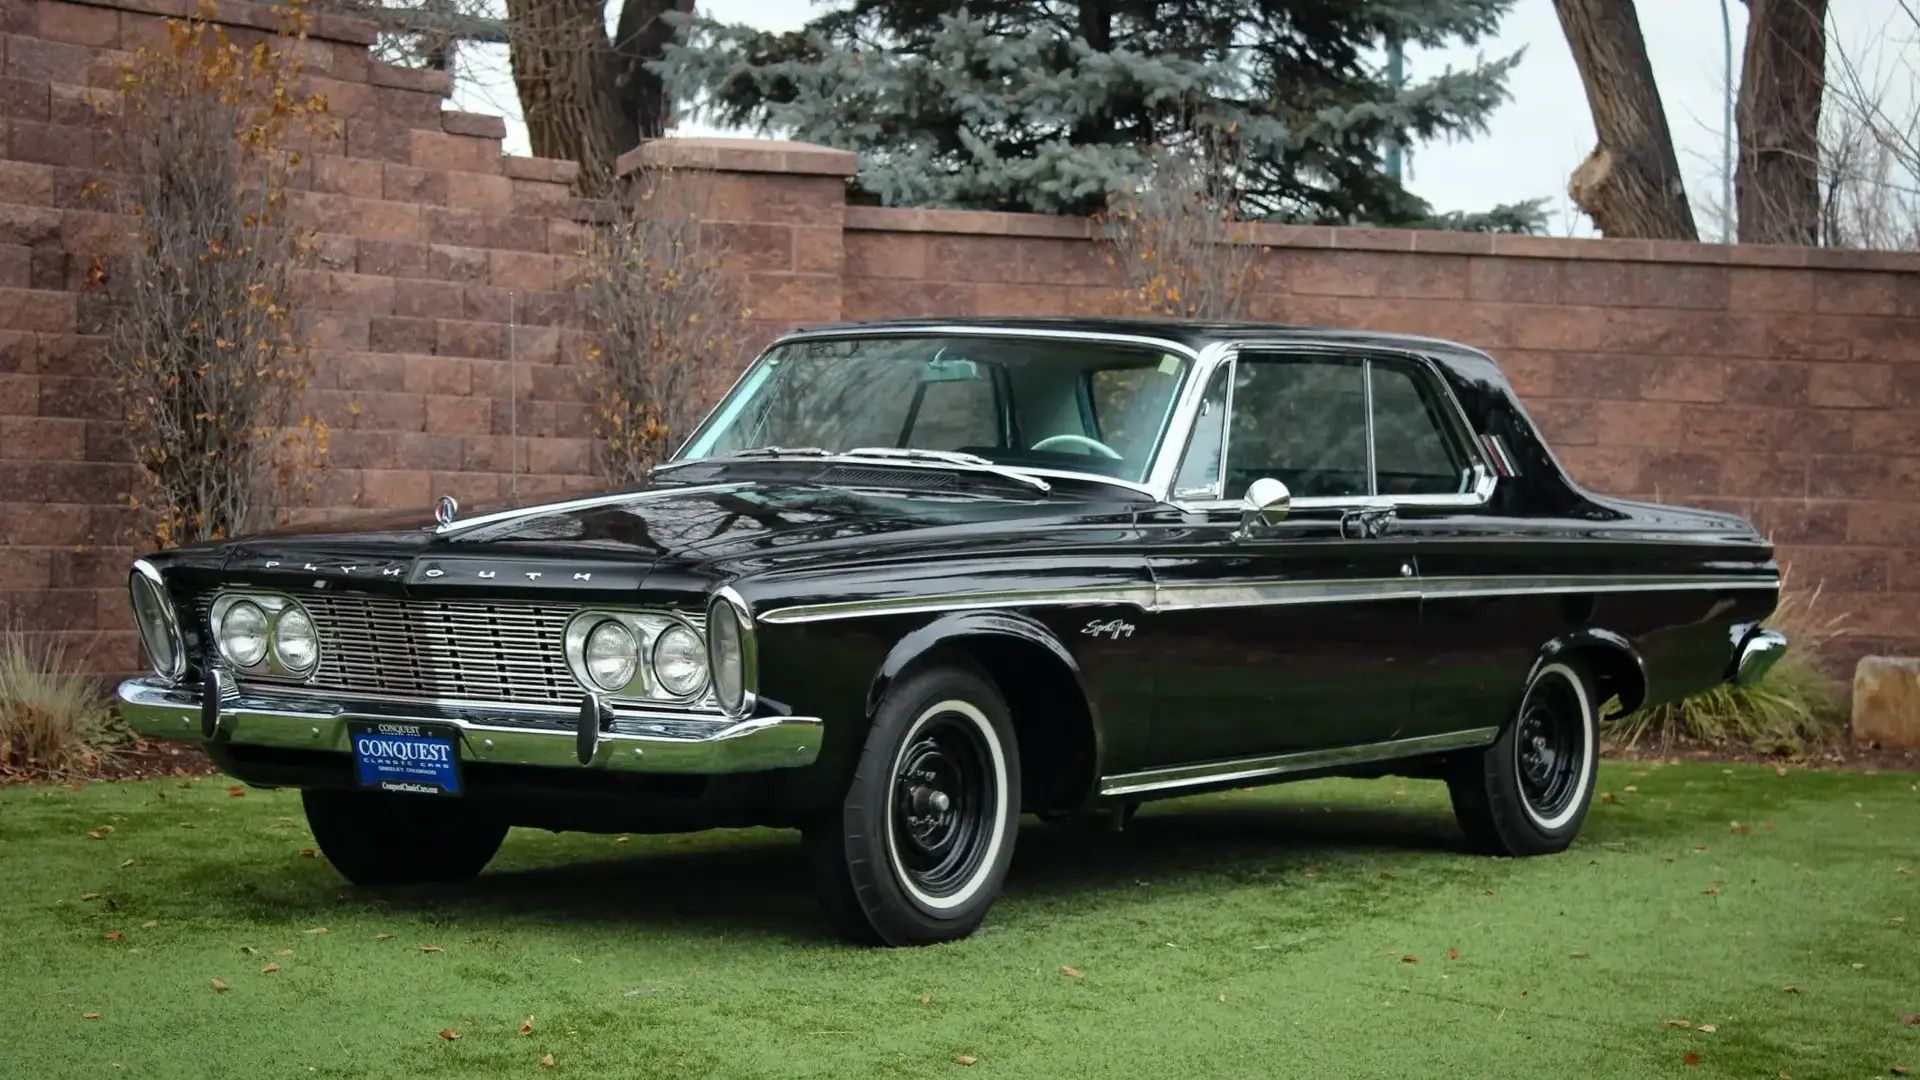 Black 1963 Plymouth Fury front quarter view